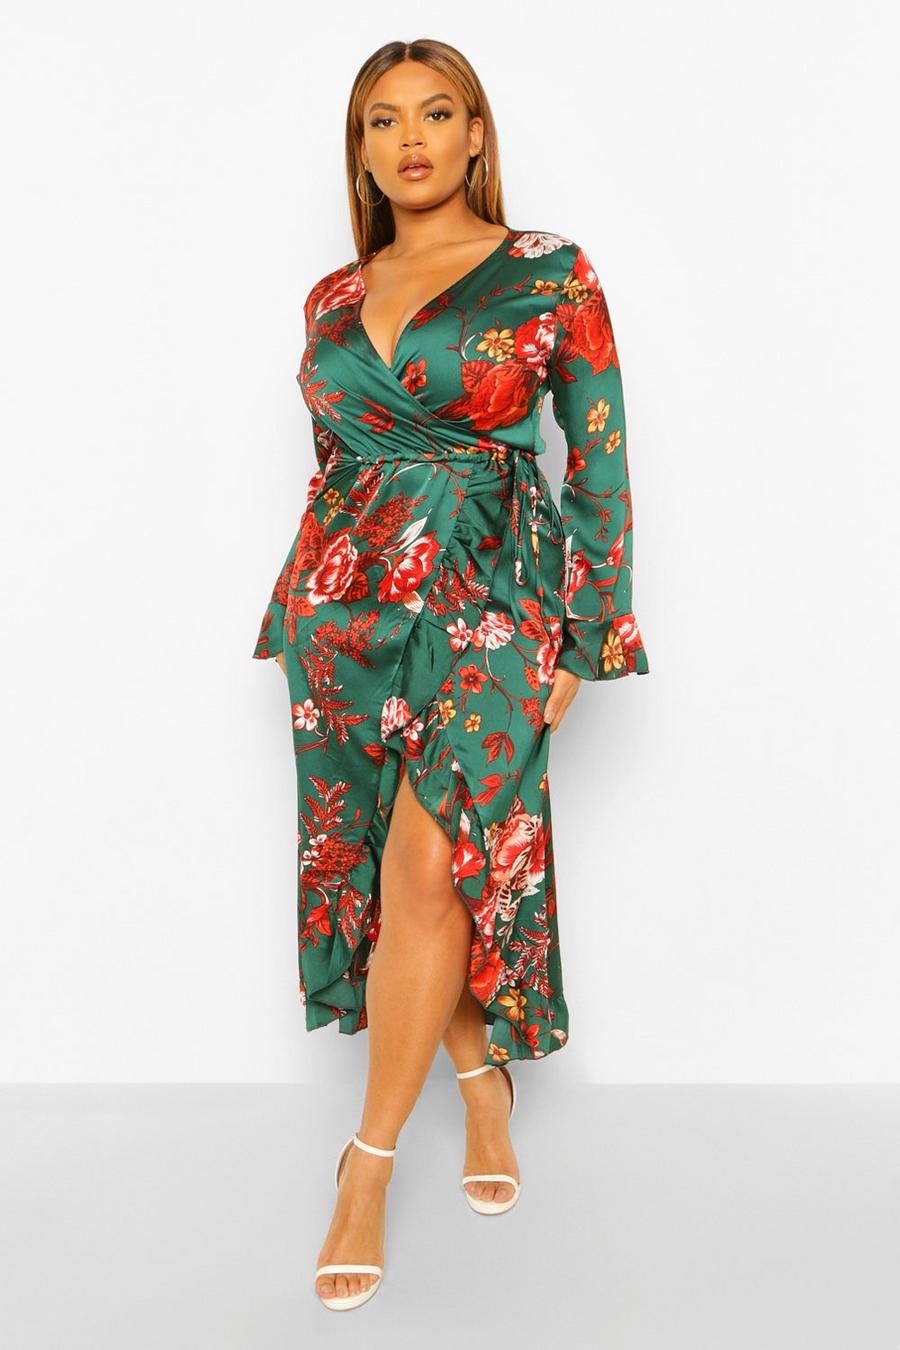 Grande taille - Robe portefeuille fleurie à volants, Green